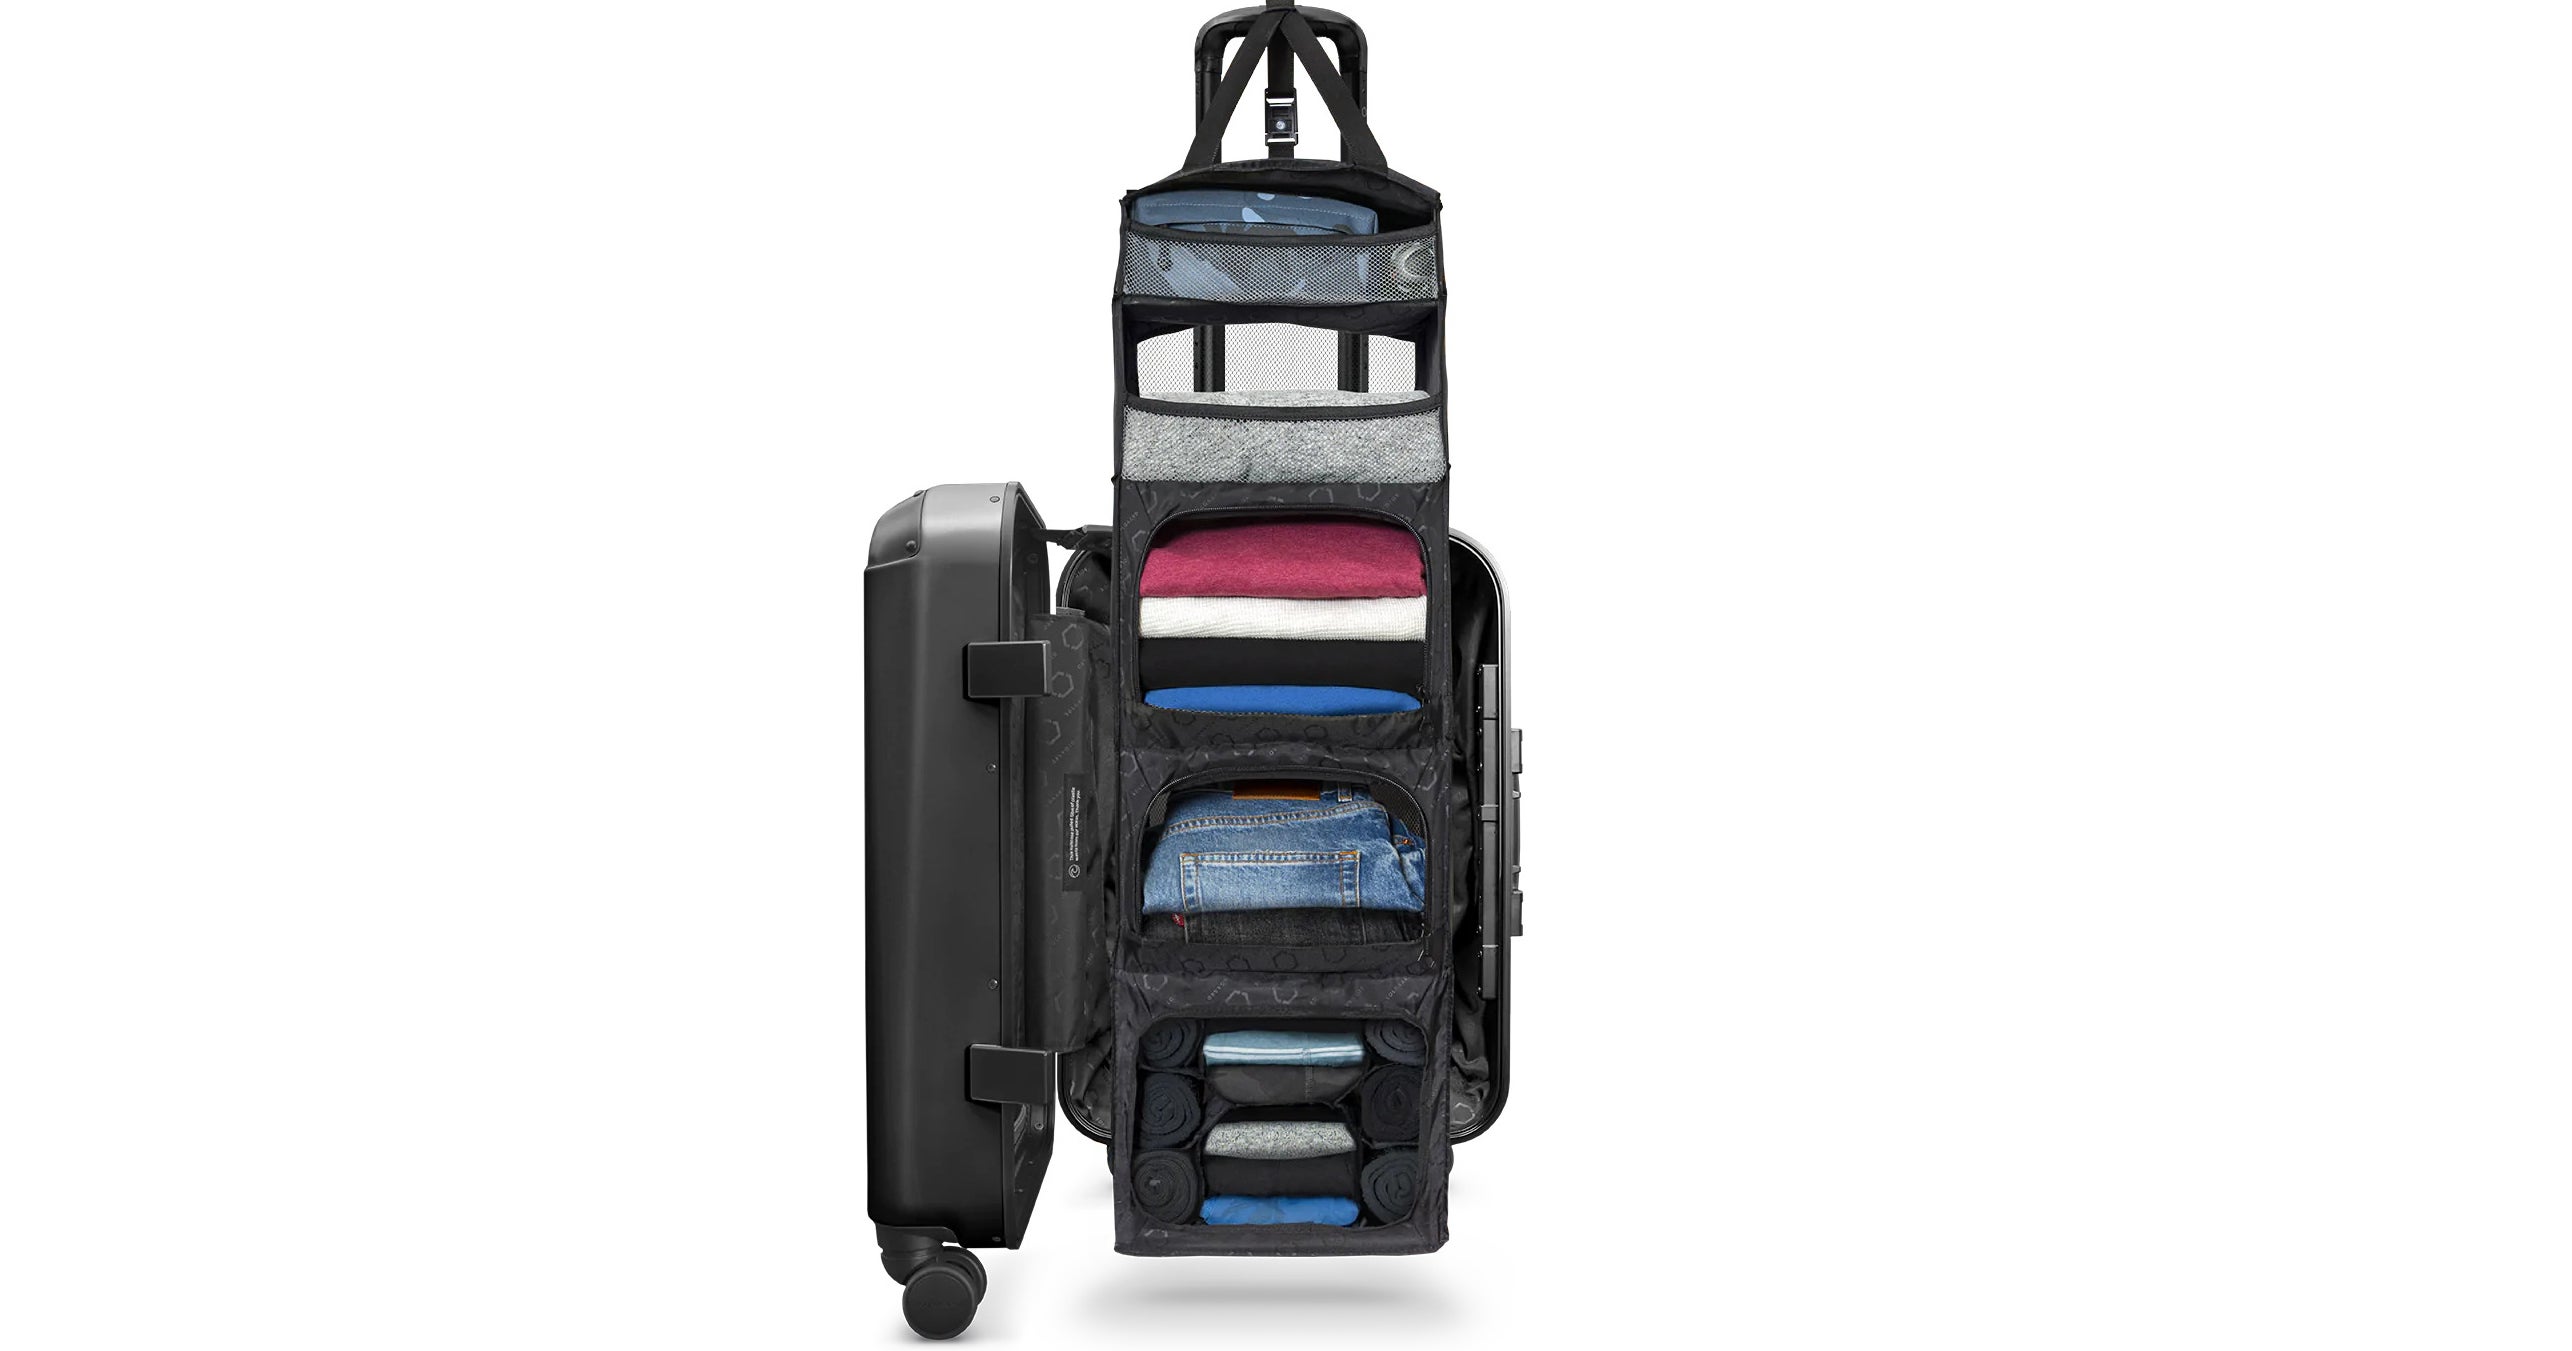 Solgaard Carry-On Closet Suitcase Review